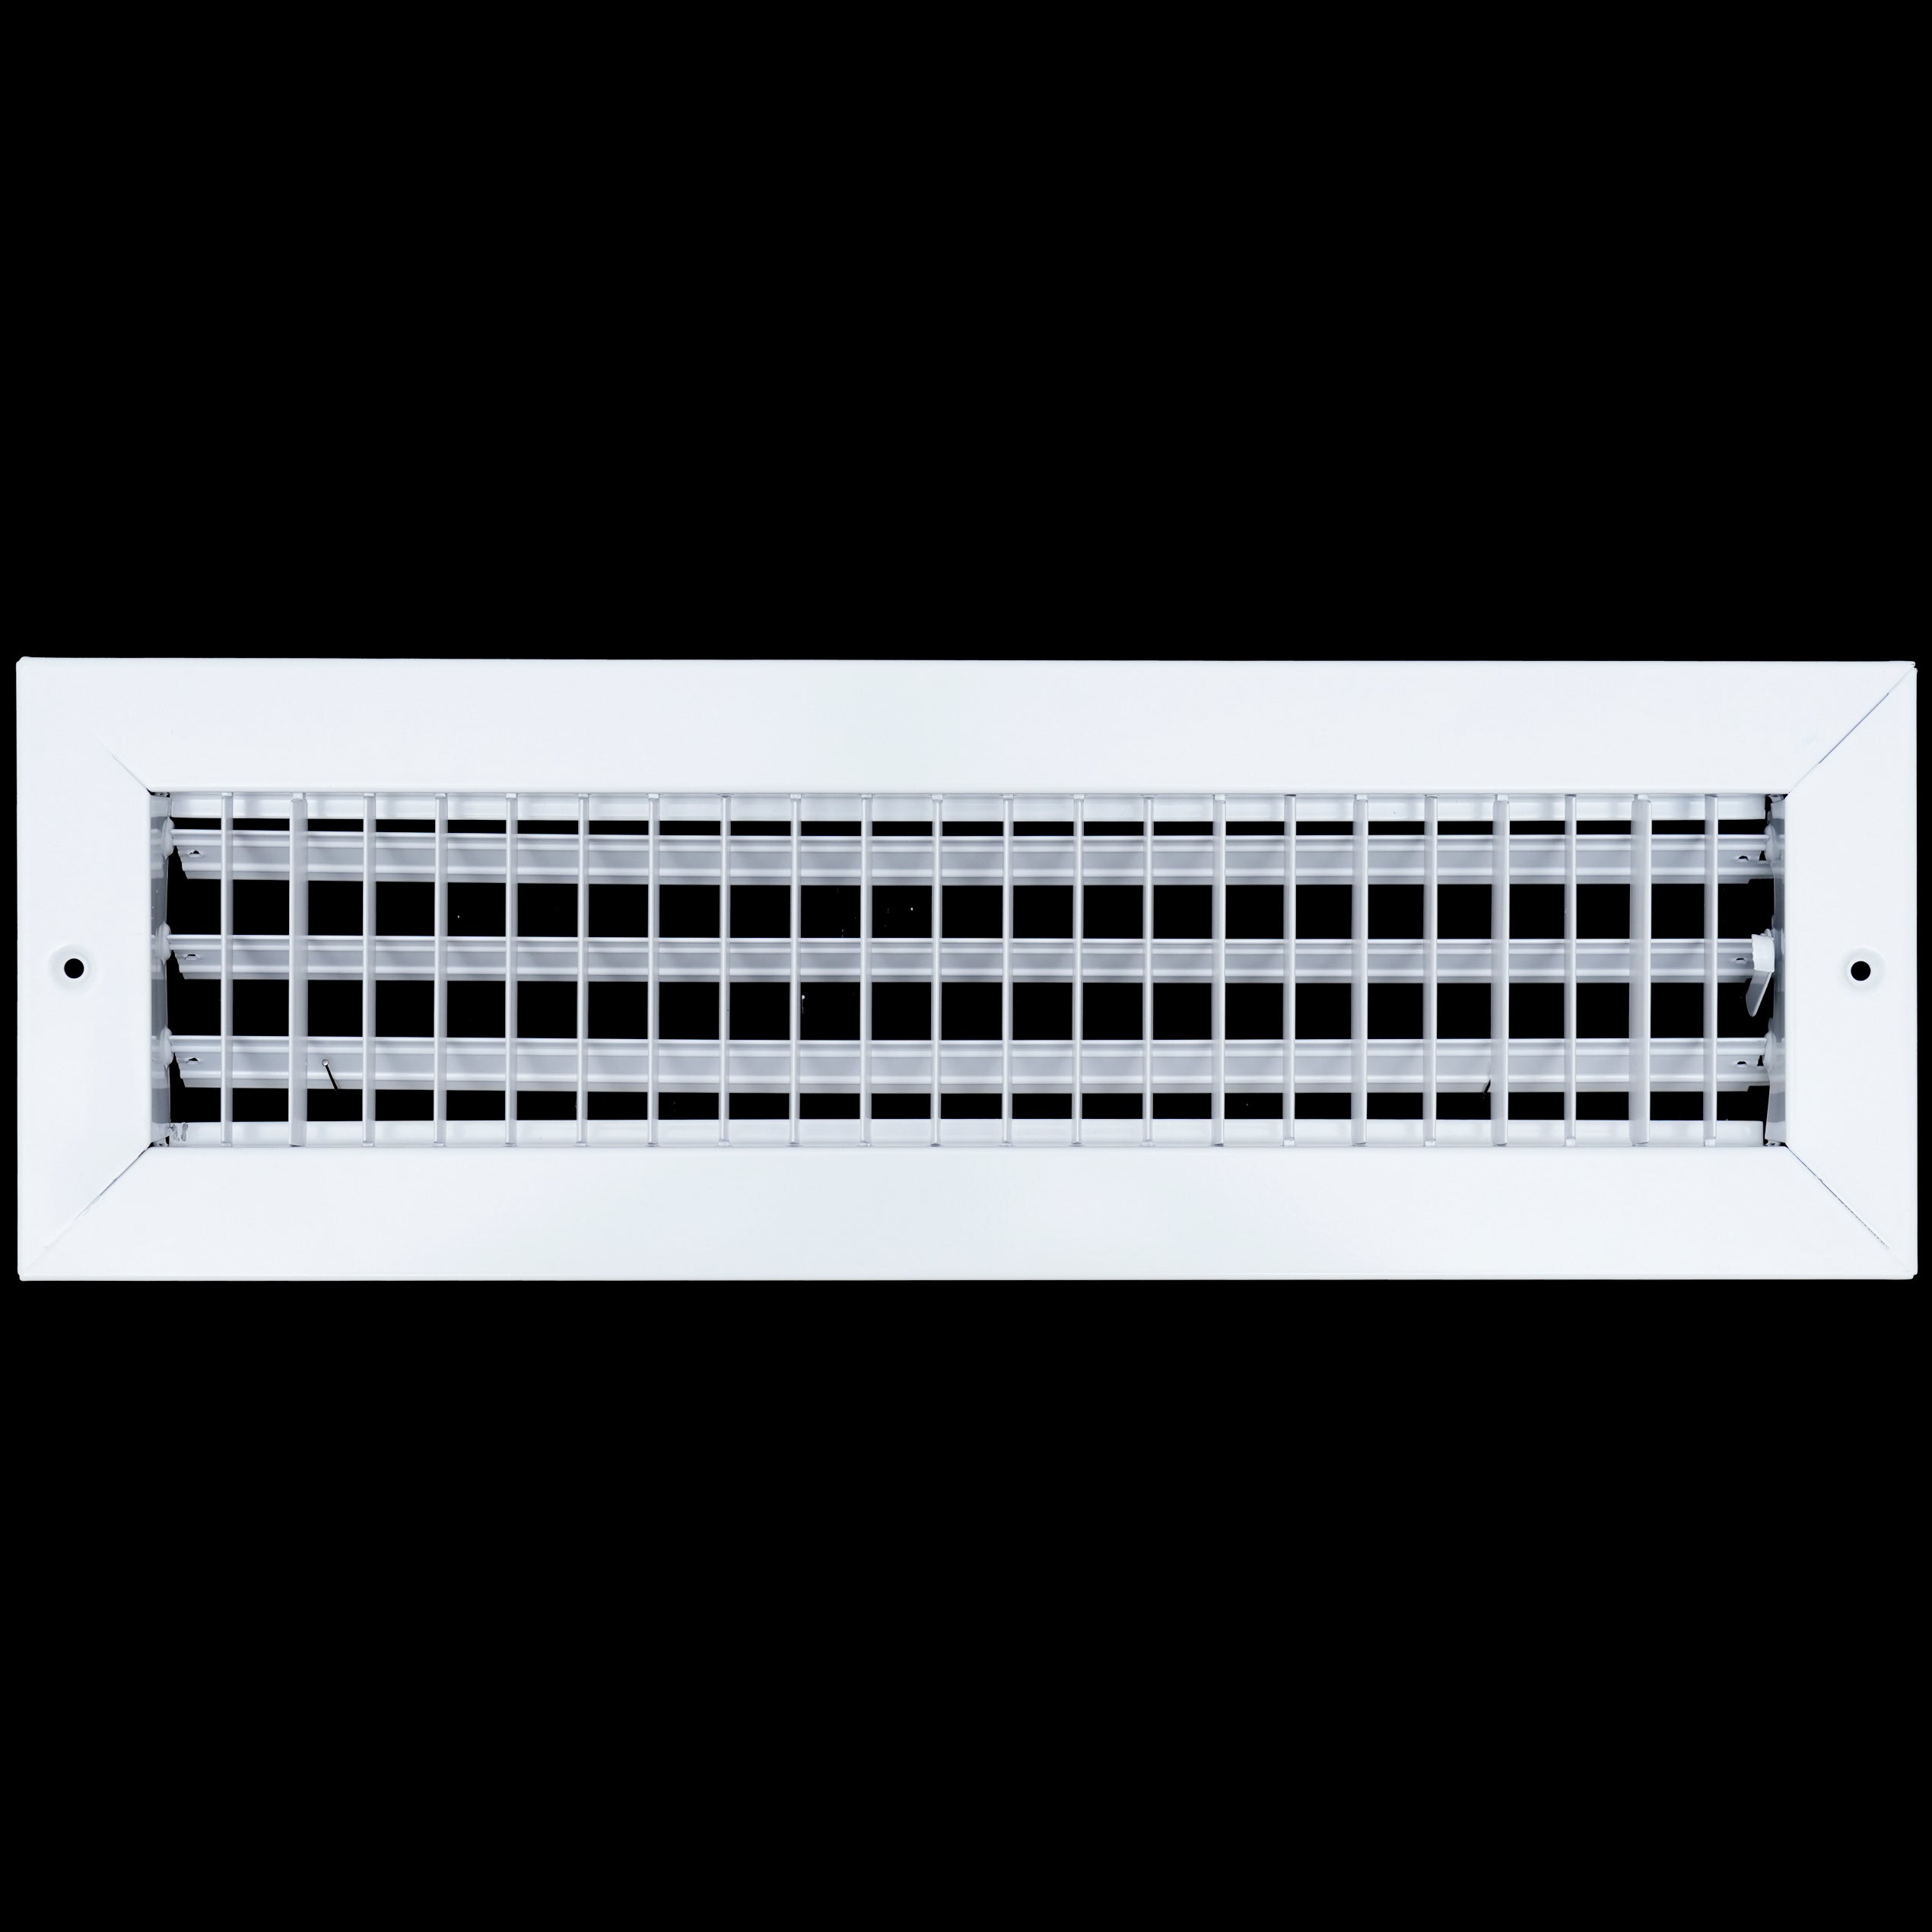 airgrilles 16x4 steel adjustable air supply grille register vent cover grill for sidewall and ceiling White  Outer Dimensions: 17.75"W X 5.75"H for 16x4 Duct Opening